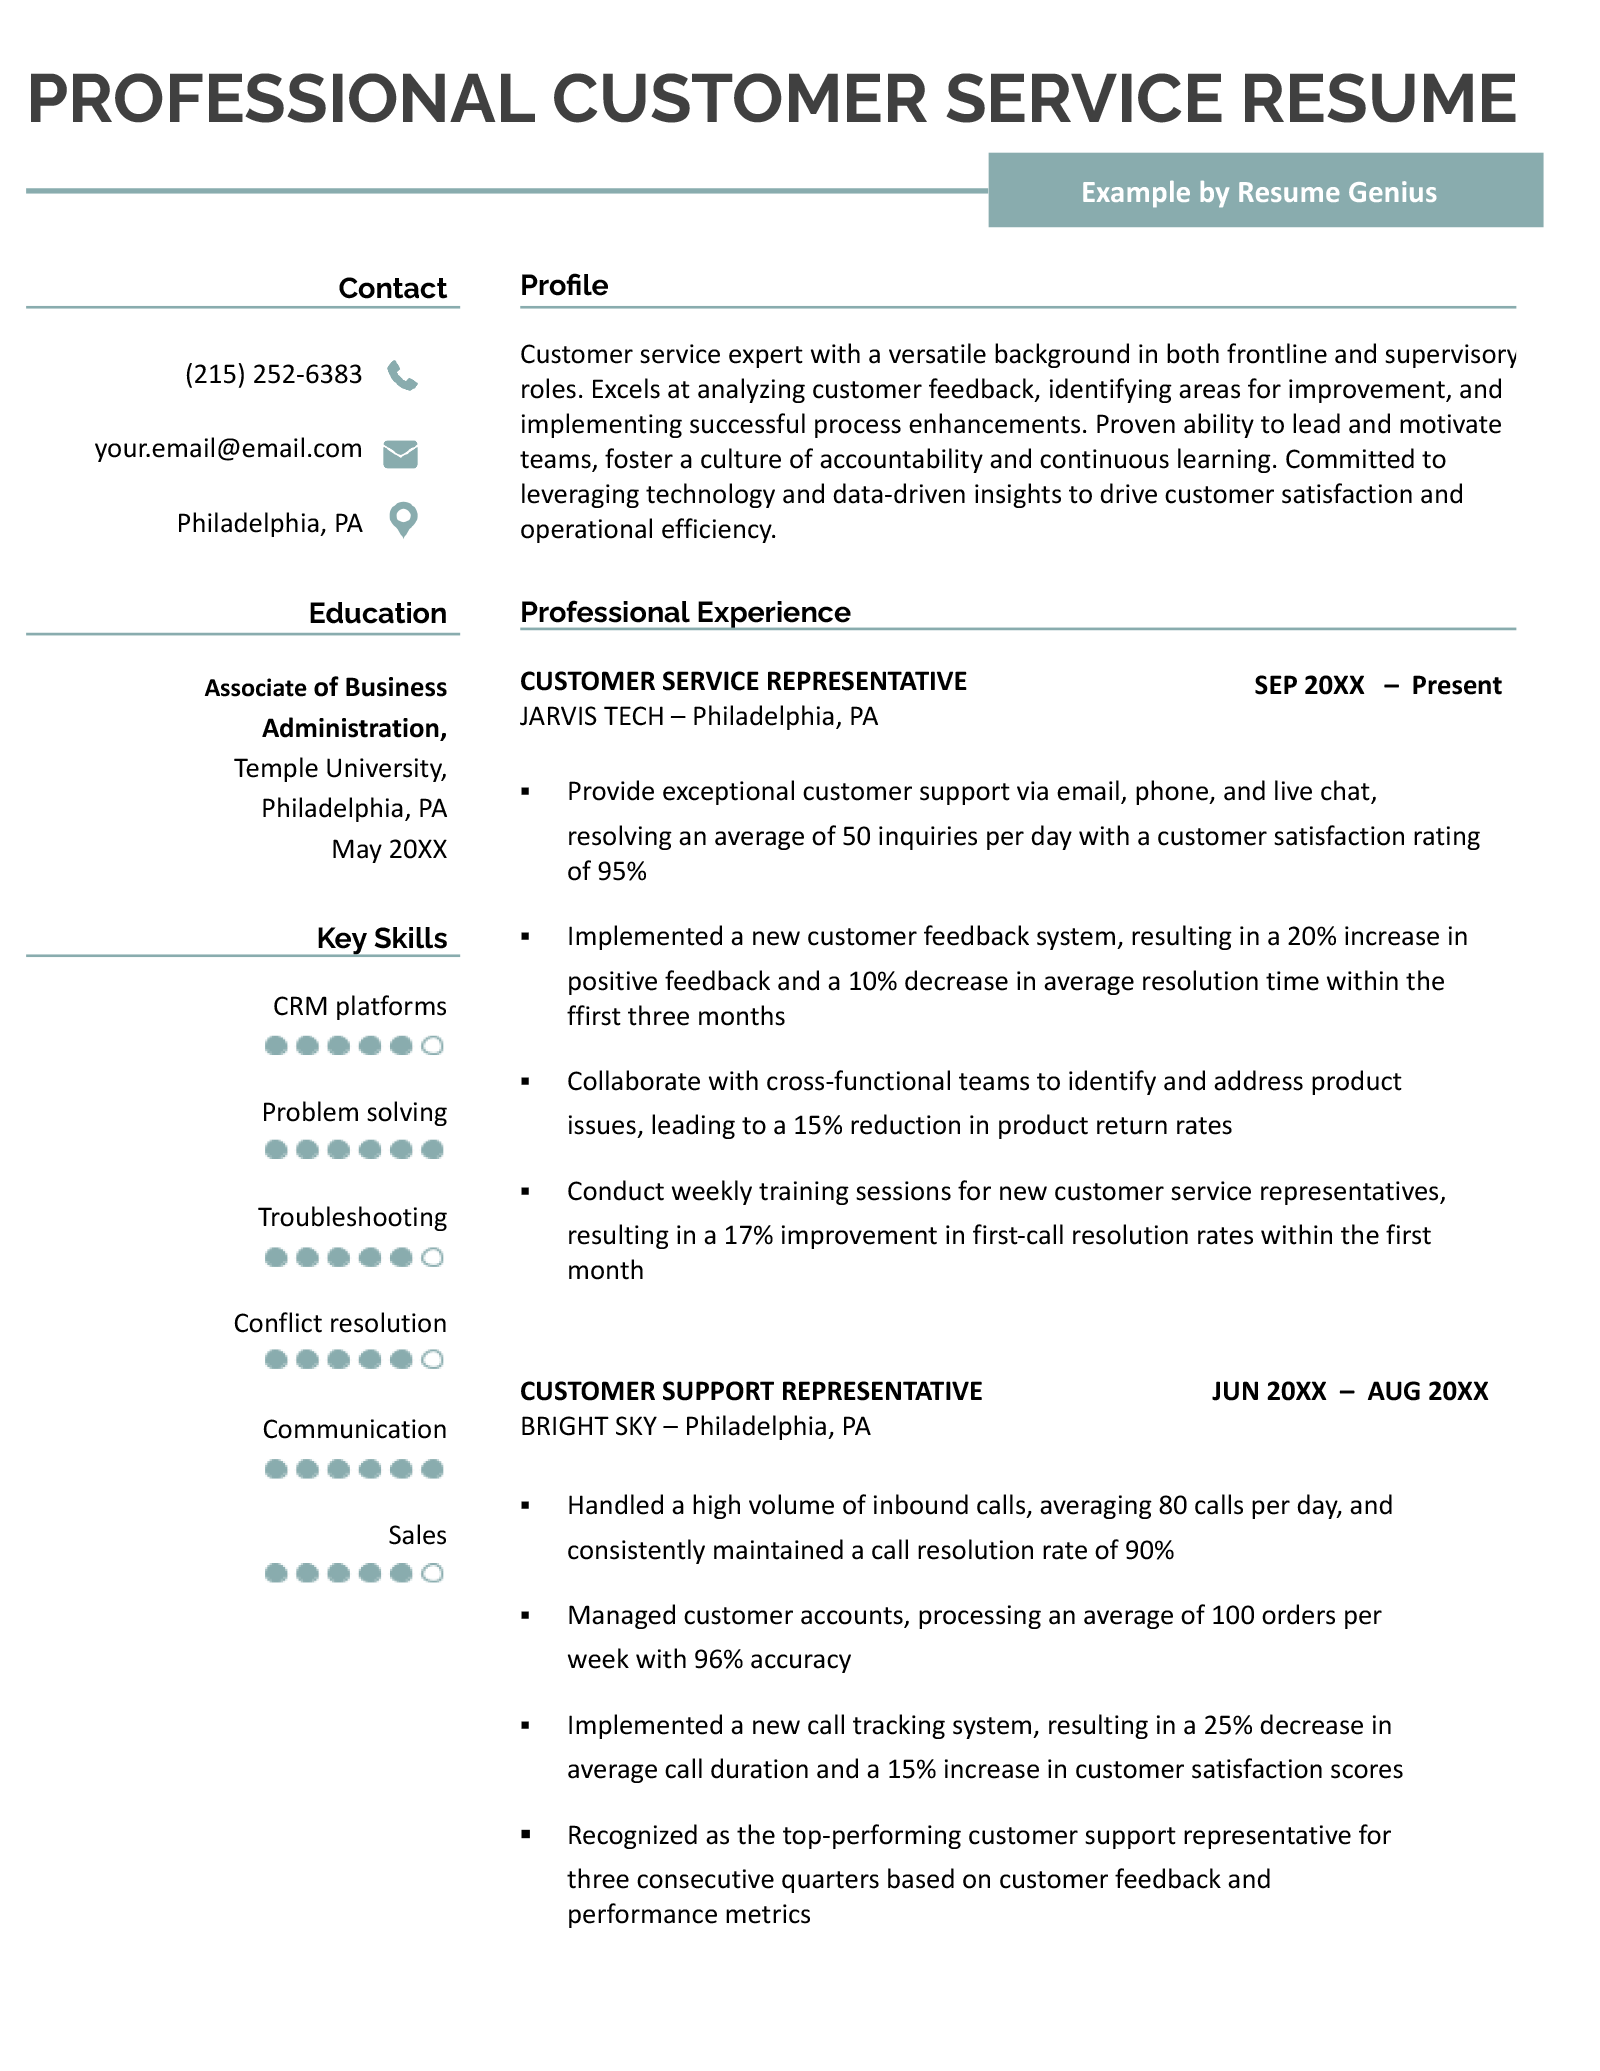 A professional customer service resume example. 